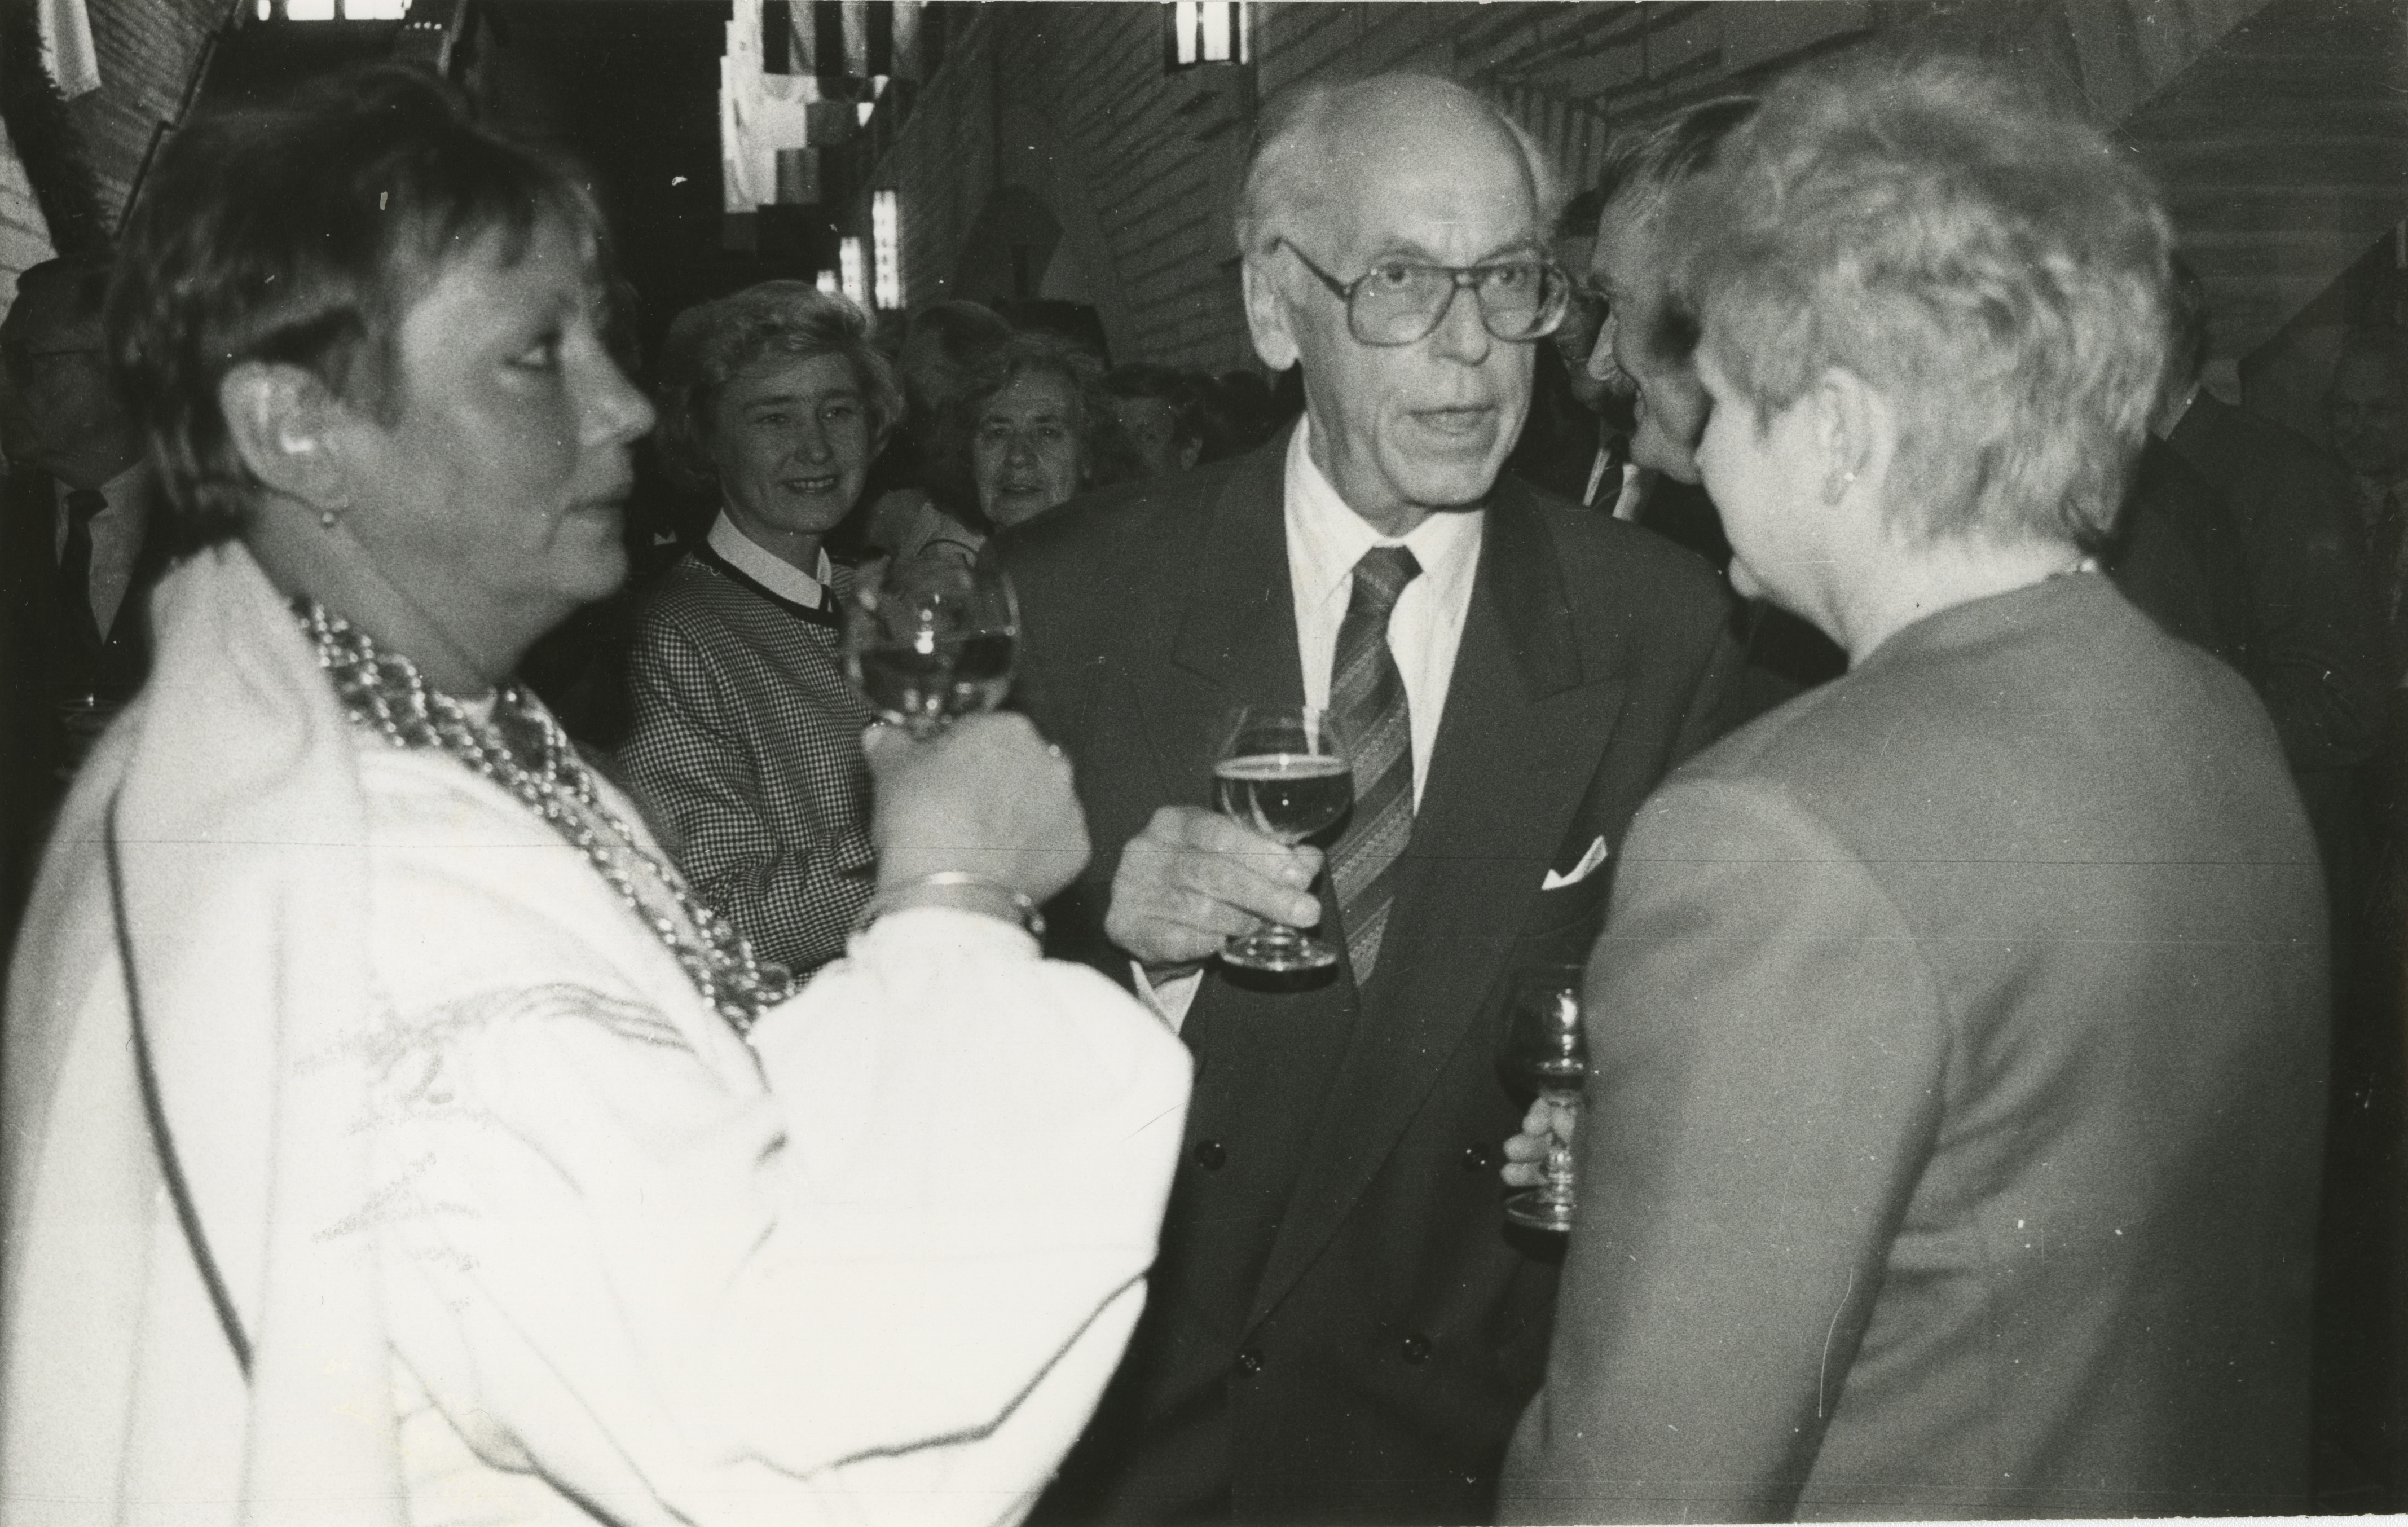 Celebration of the opening of the new building of the National Library. On the left, Director General Ivi Eenmaa, in the middle of President Lennart Meri, on the right Sirje Endre